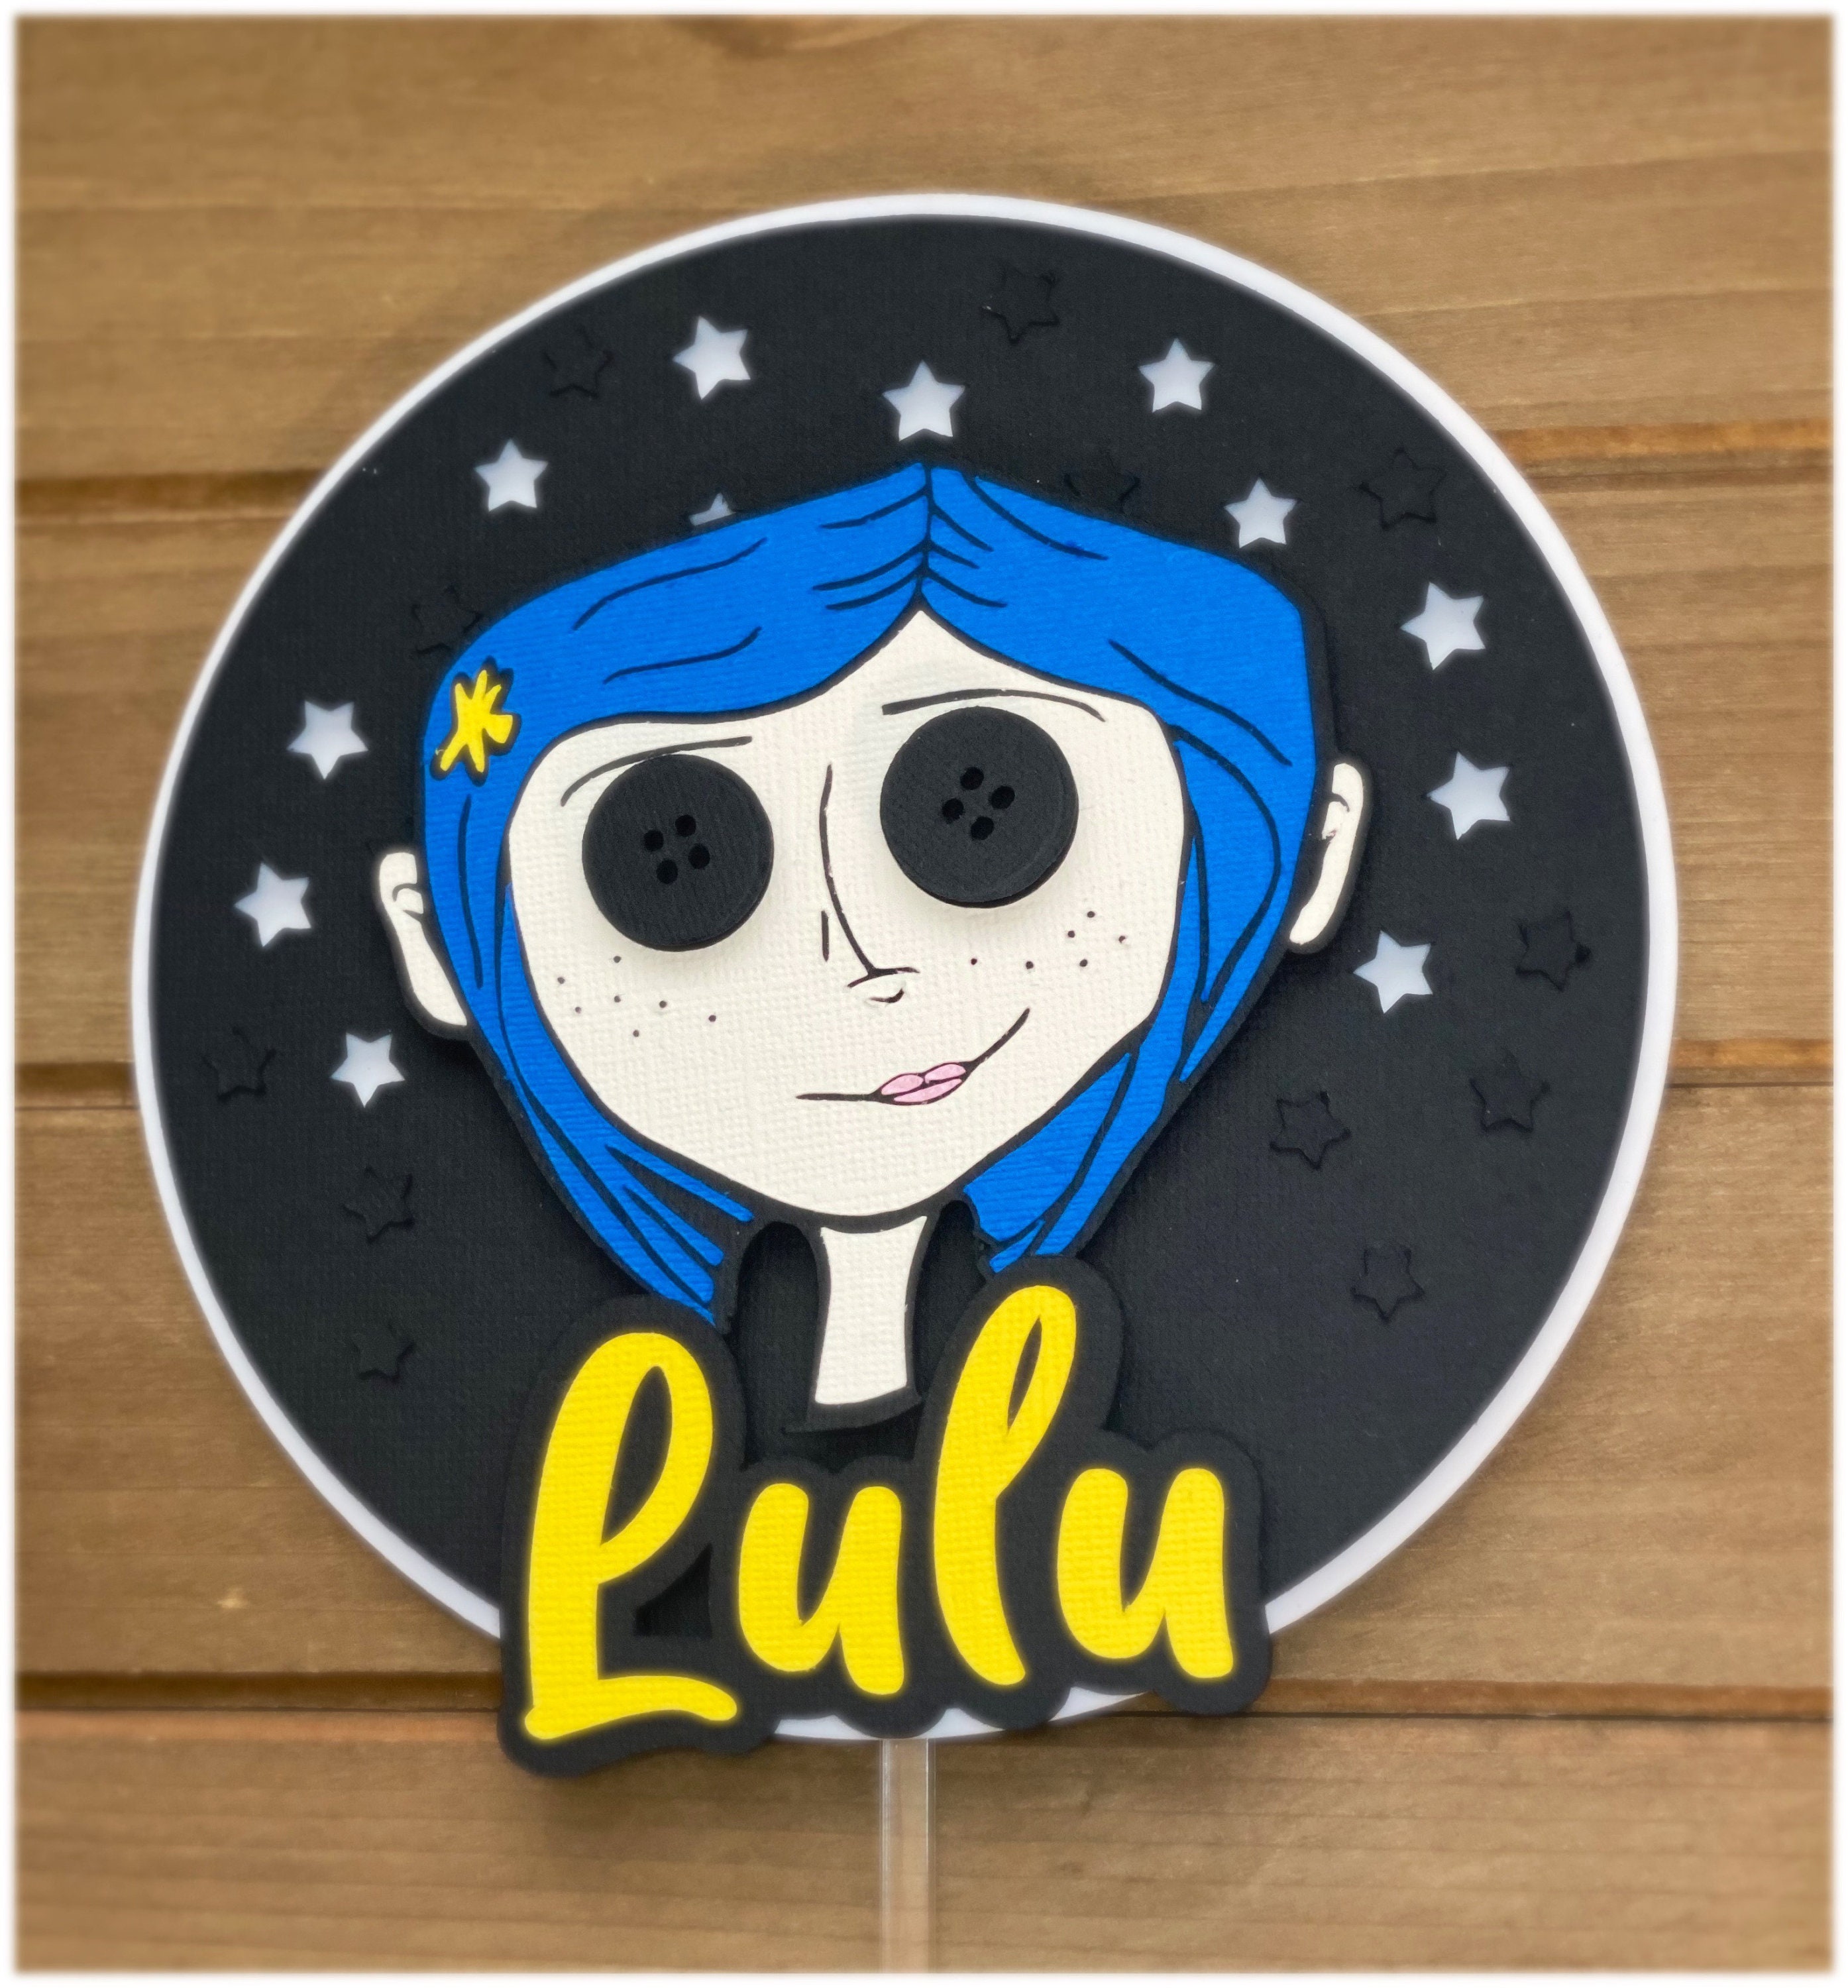 46 Pcs Coraline Birthday Decorations, Coraline Movie Theme Birthday Party  Supplies for Kids Halloween Decor Includes Happy Birthday Banner, Latex  Balloons, Cake Topper, Cupcake Toppers 